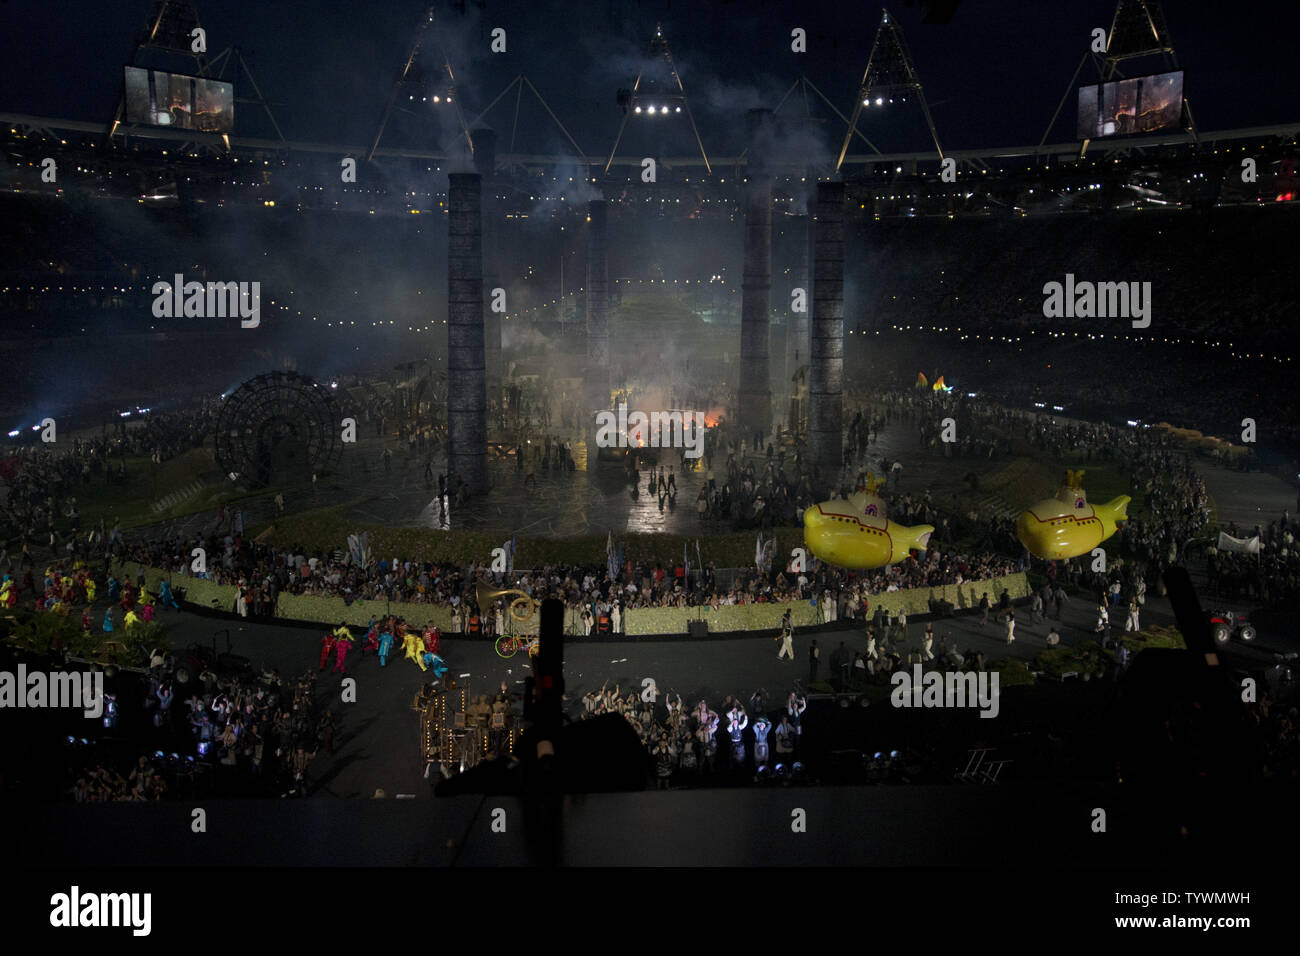 Actors perform during the Age of Industry scene during the Opening Ceremony at the London 2012 Summer Olympic Games on July 27, 2012 in London.   UPI/Ron Sachs Stock Photo